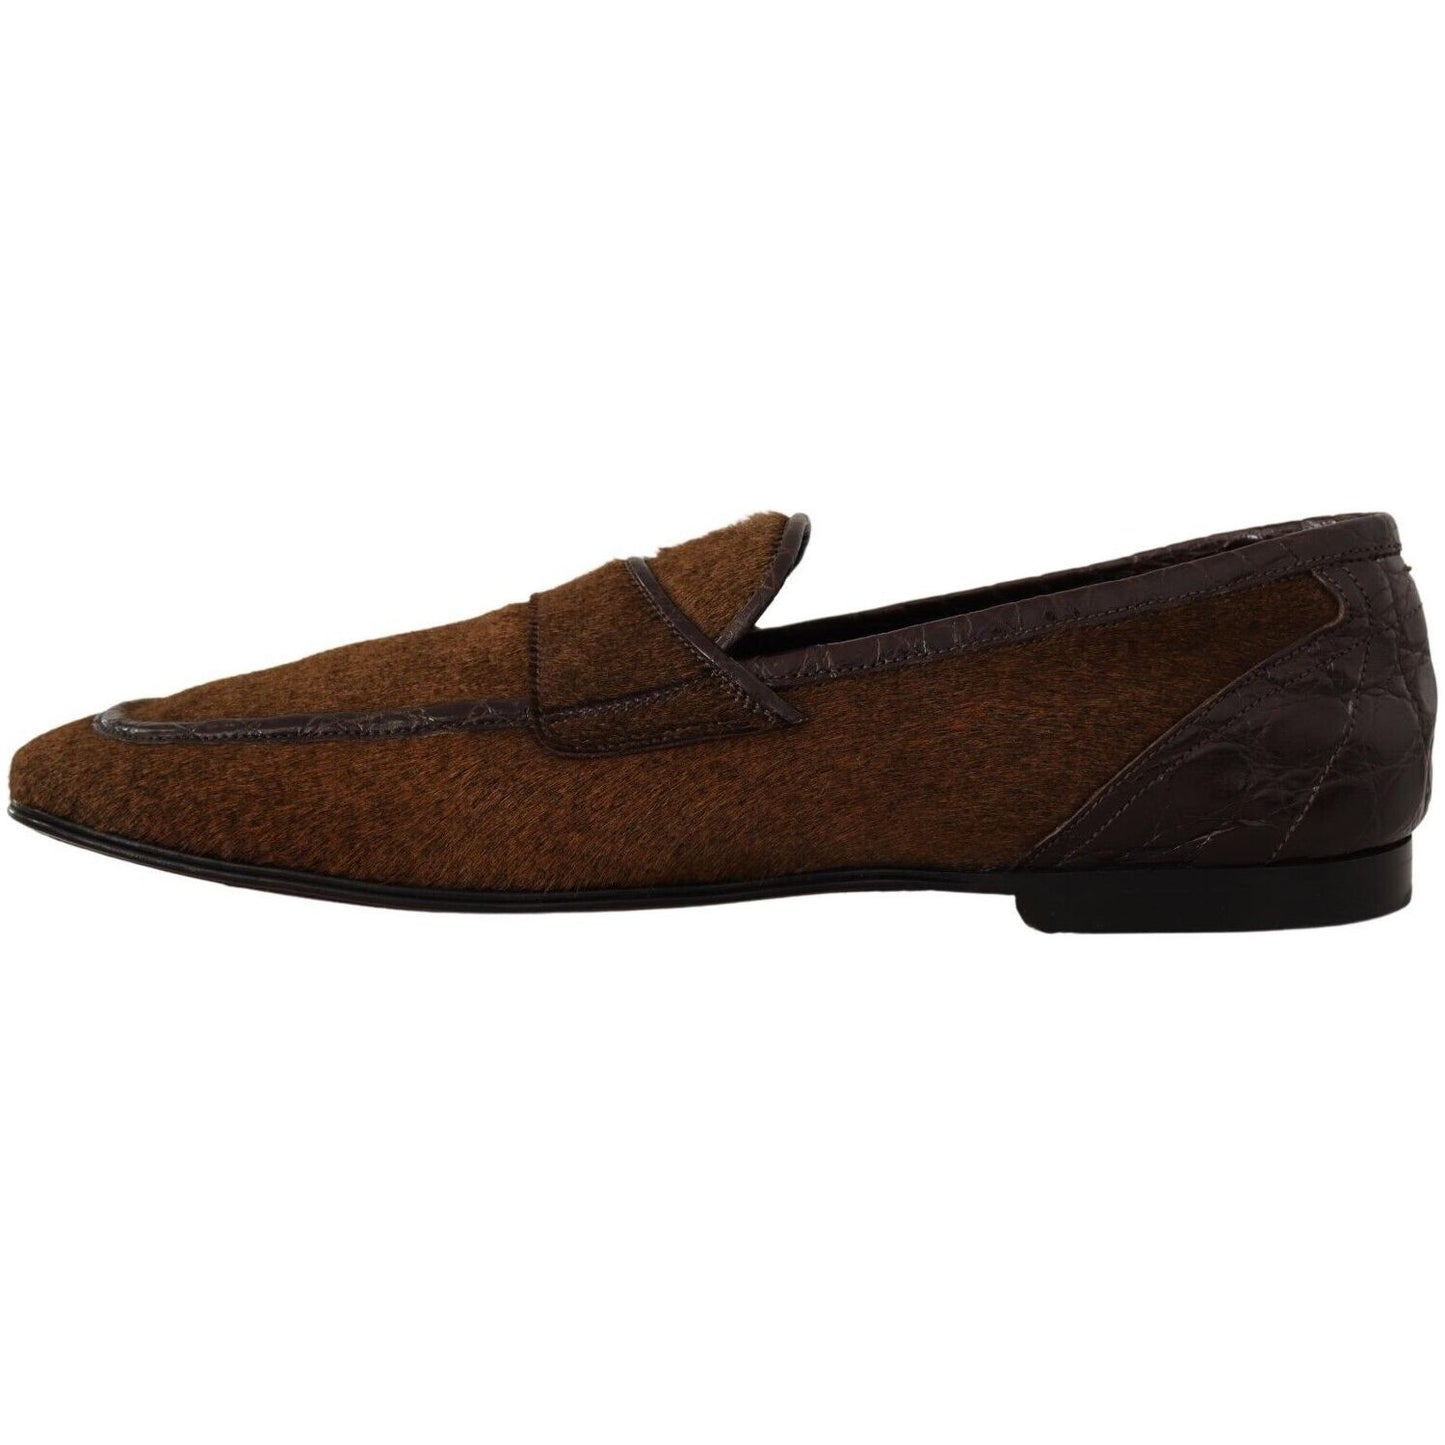 Dolce & Gabbana Exquisite Exotic Leather Loafers brown-exotic-leather-mens-slip-on-loafers-shoes s-l1600-19-6-27999302-329.jpg